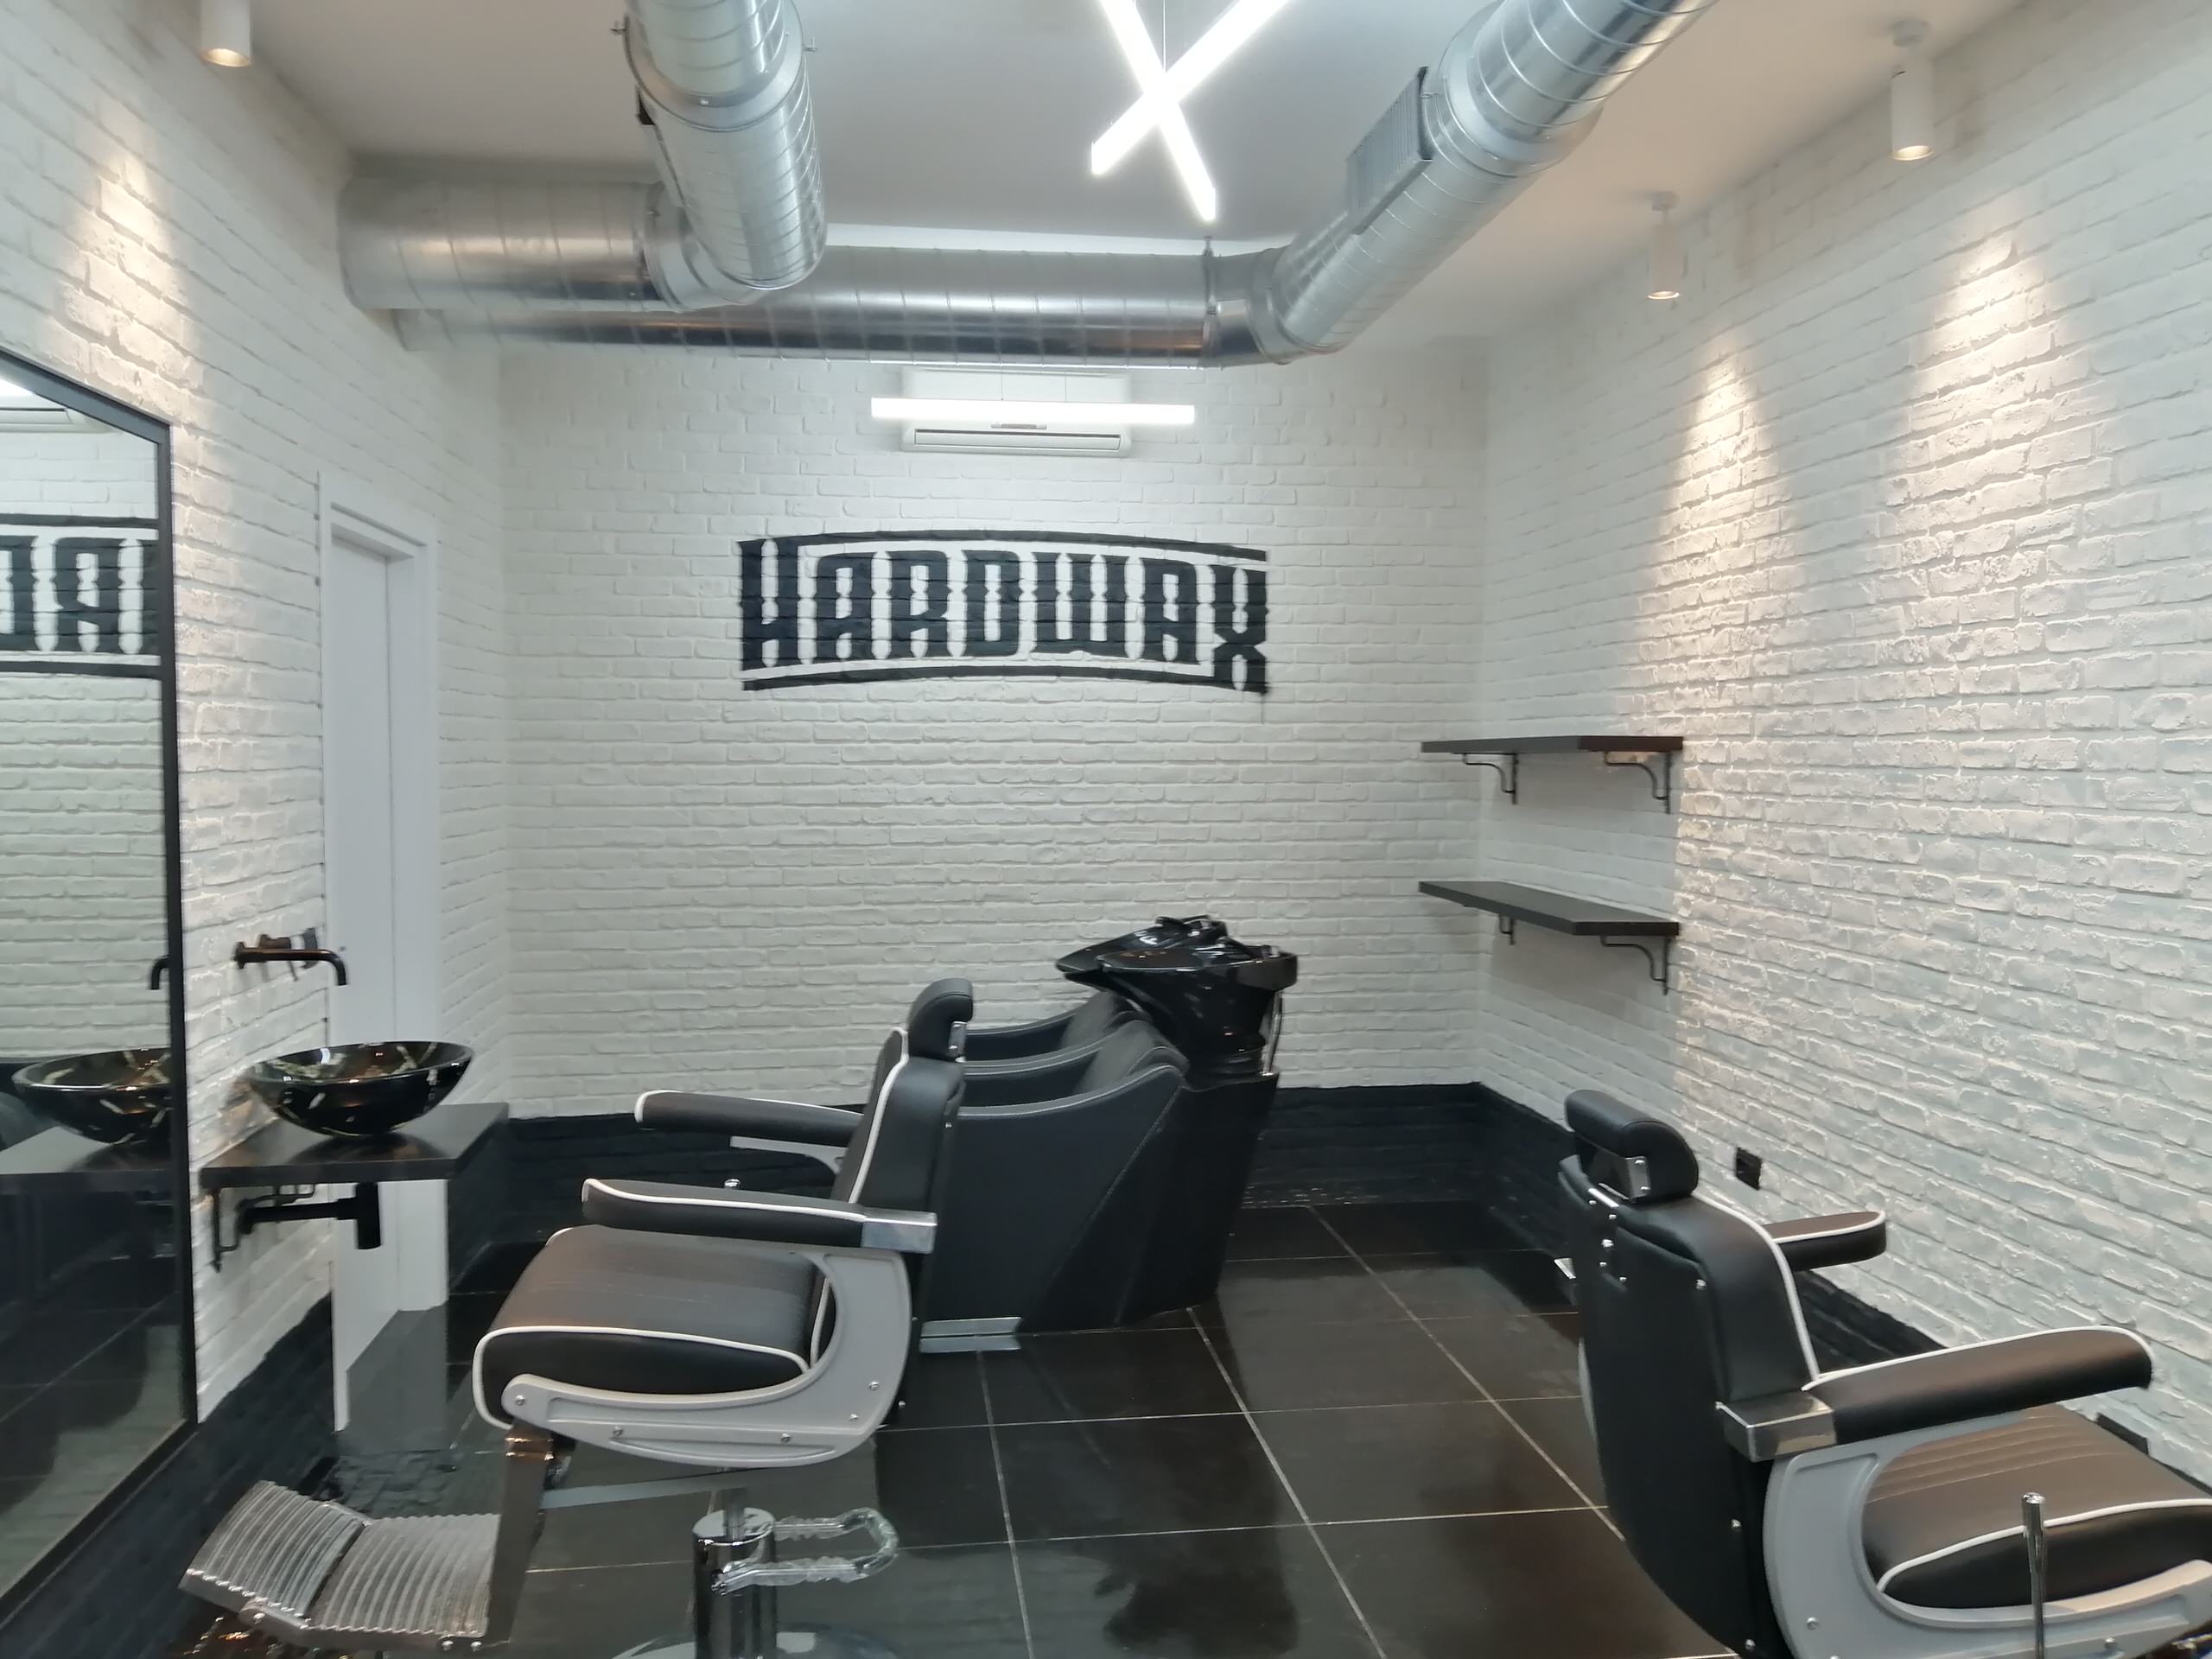 Barber shop industrial style